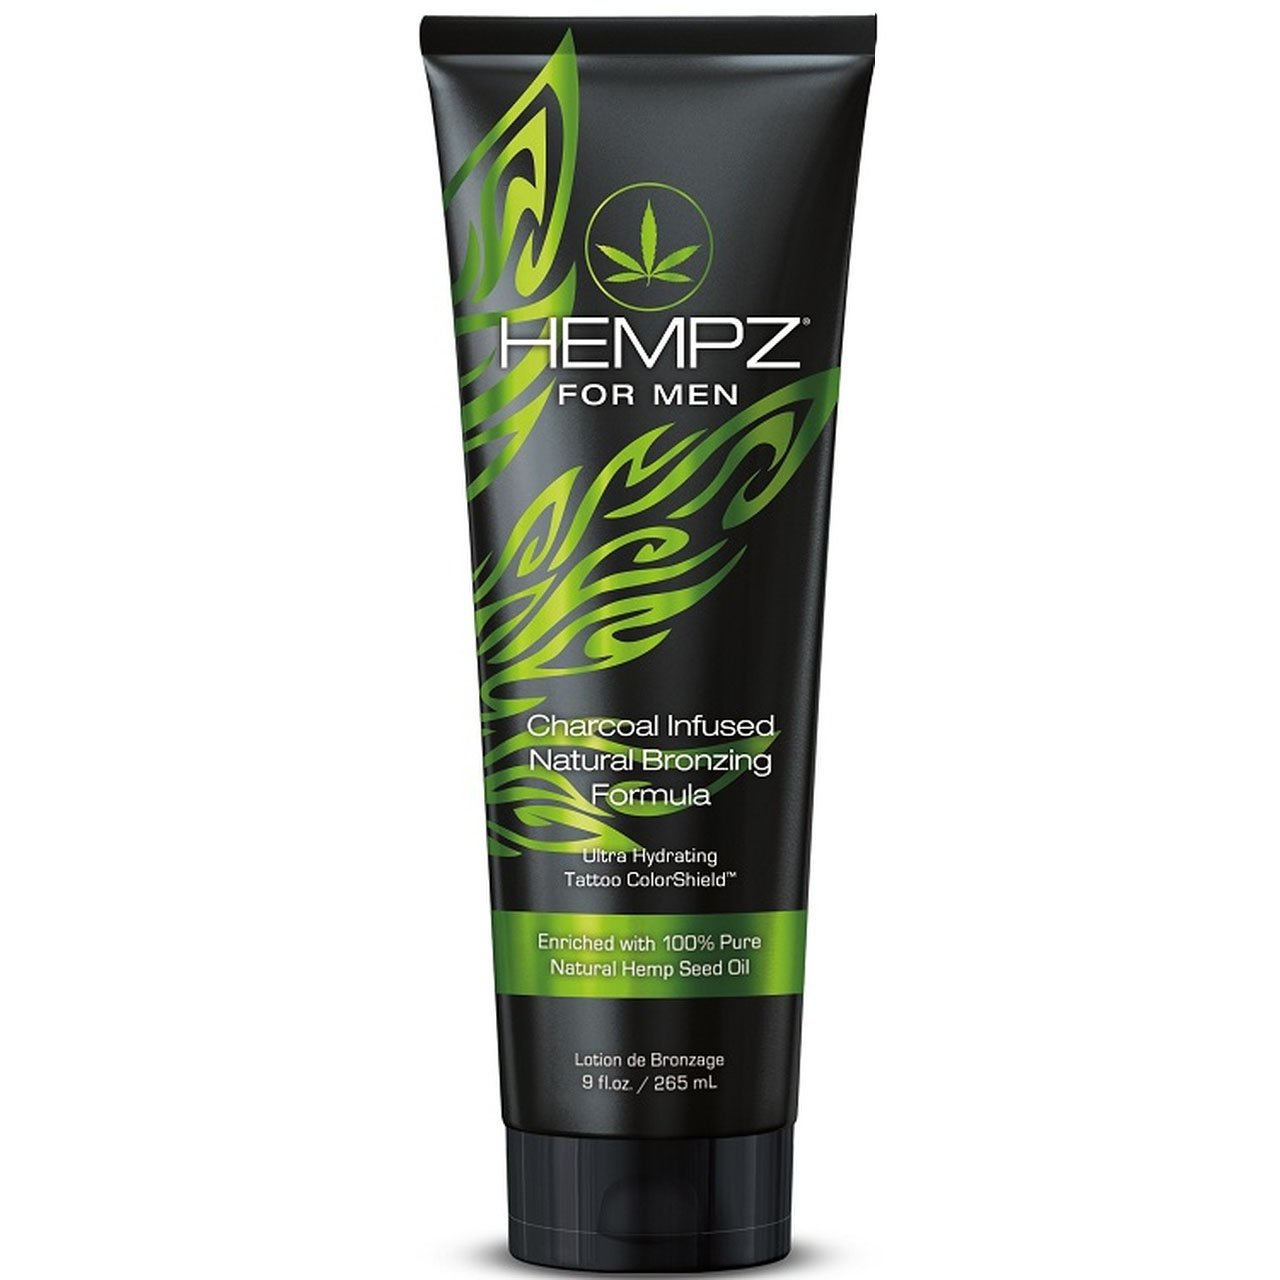 Hempz for Men Natural Bronzing Charcoal Infused Tanning Lotion - LuxuryBeautySource.com